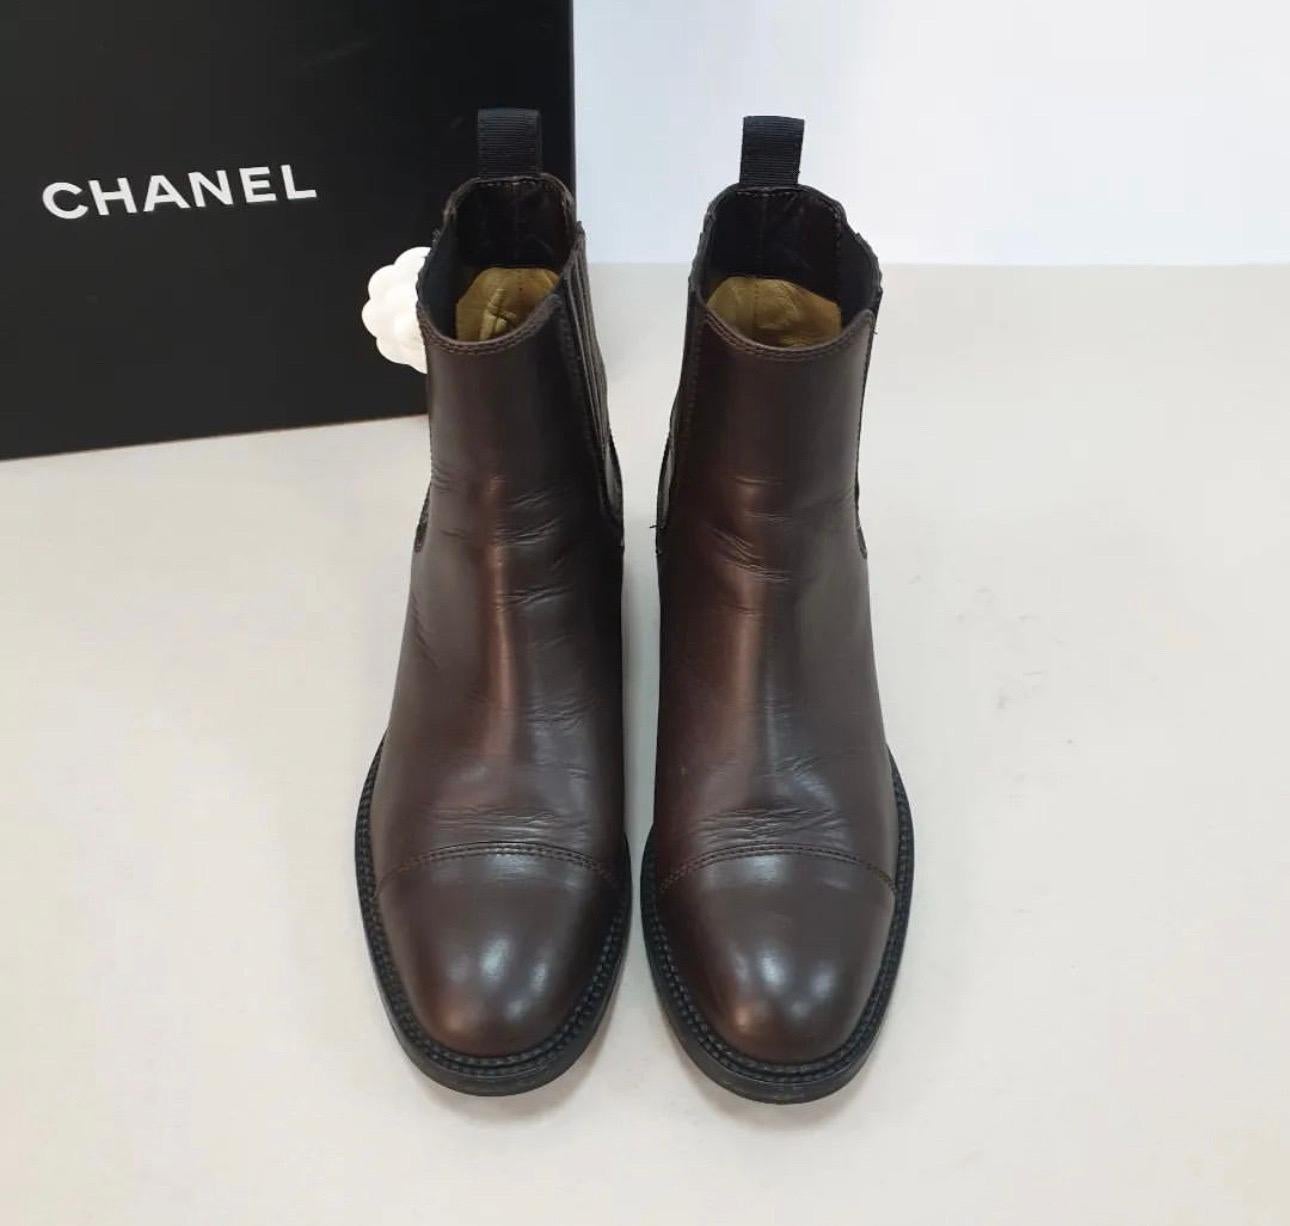 chelsea boots chanel